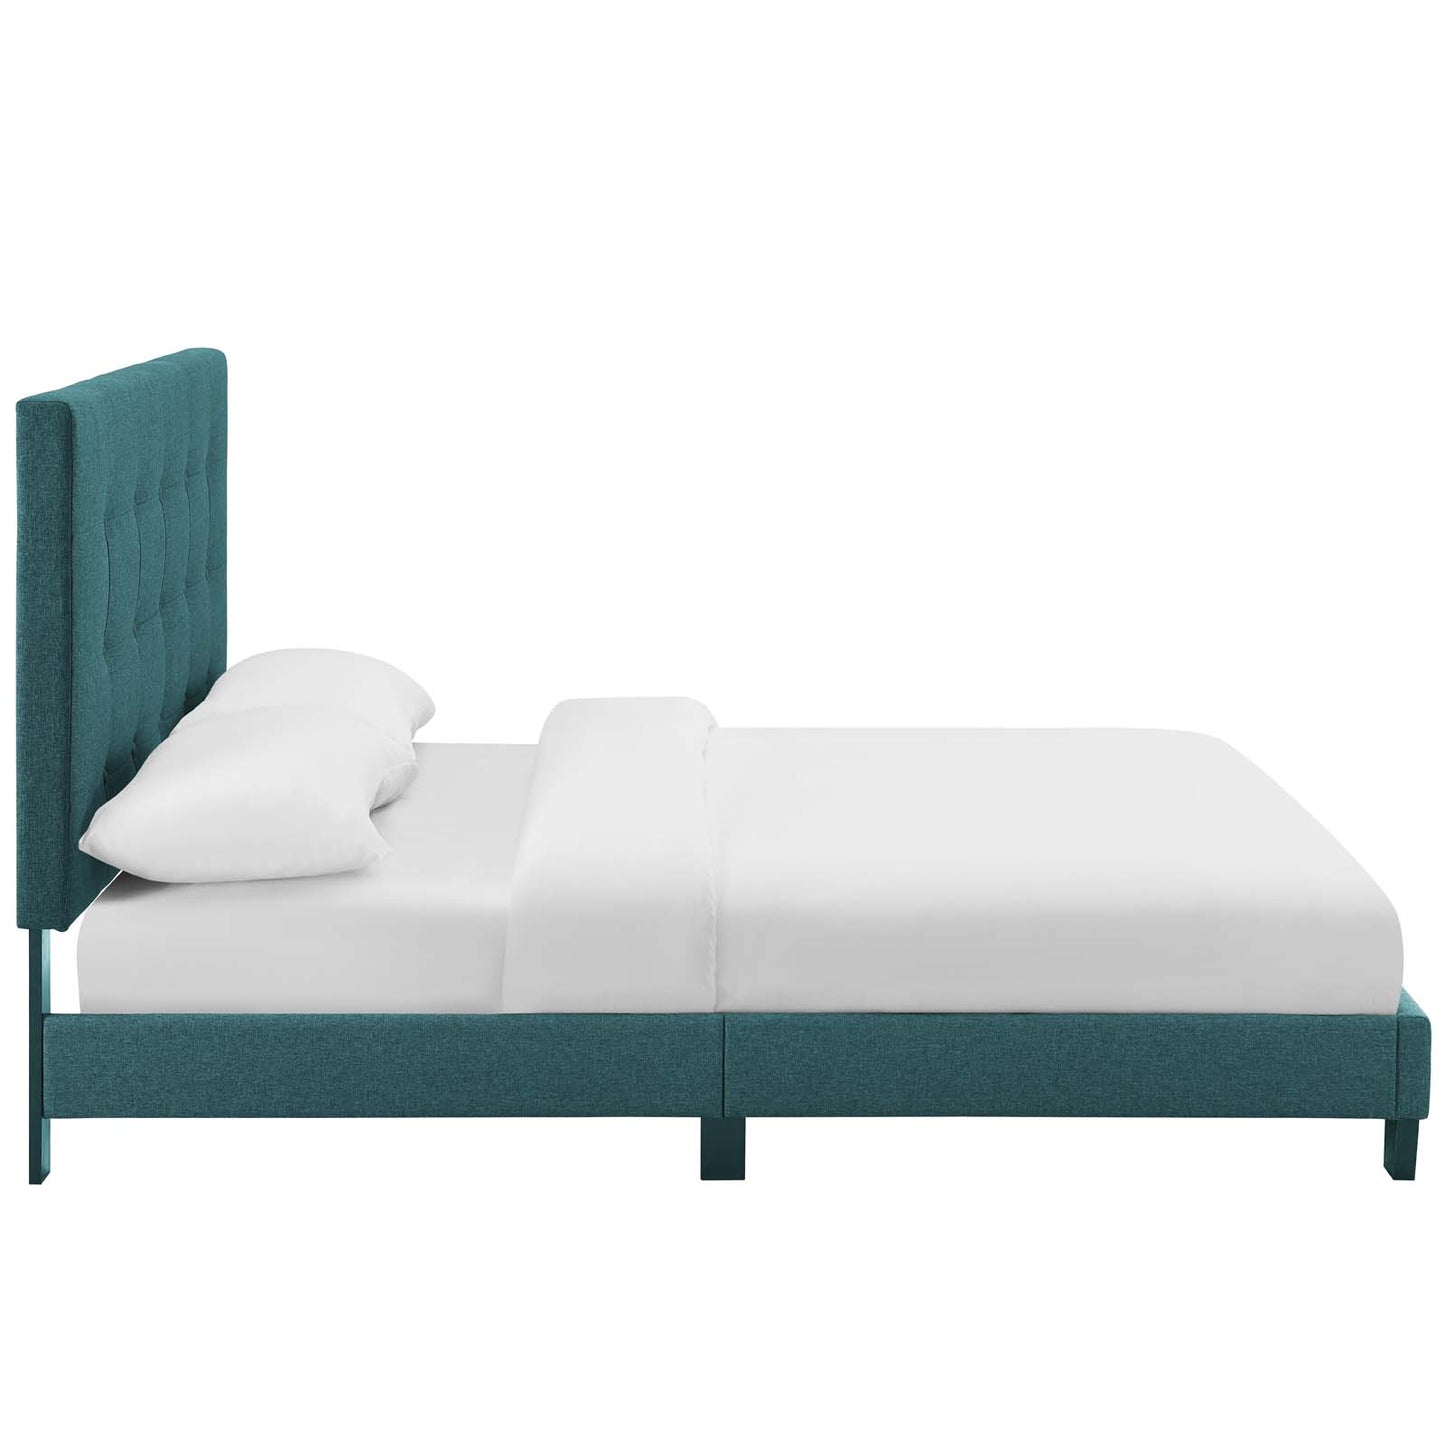 Melanie Queen Tufted Button Upholstered Fabric Platform Bed Teal MOD-5879-TEA